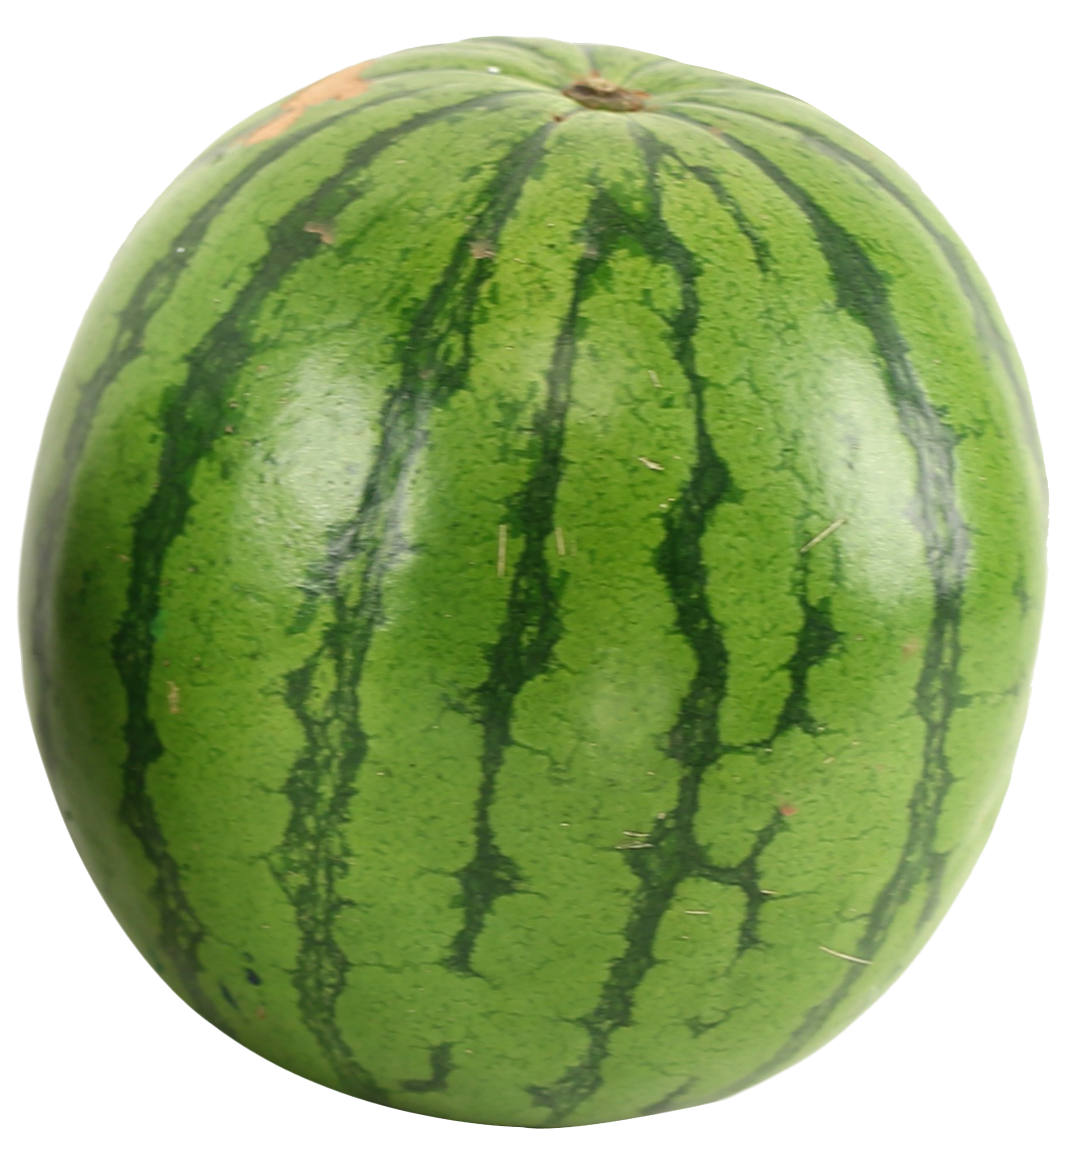 Watermelon Download PNG Image